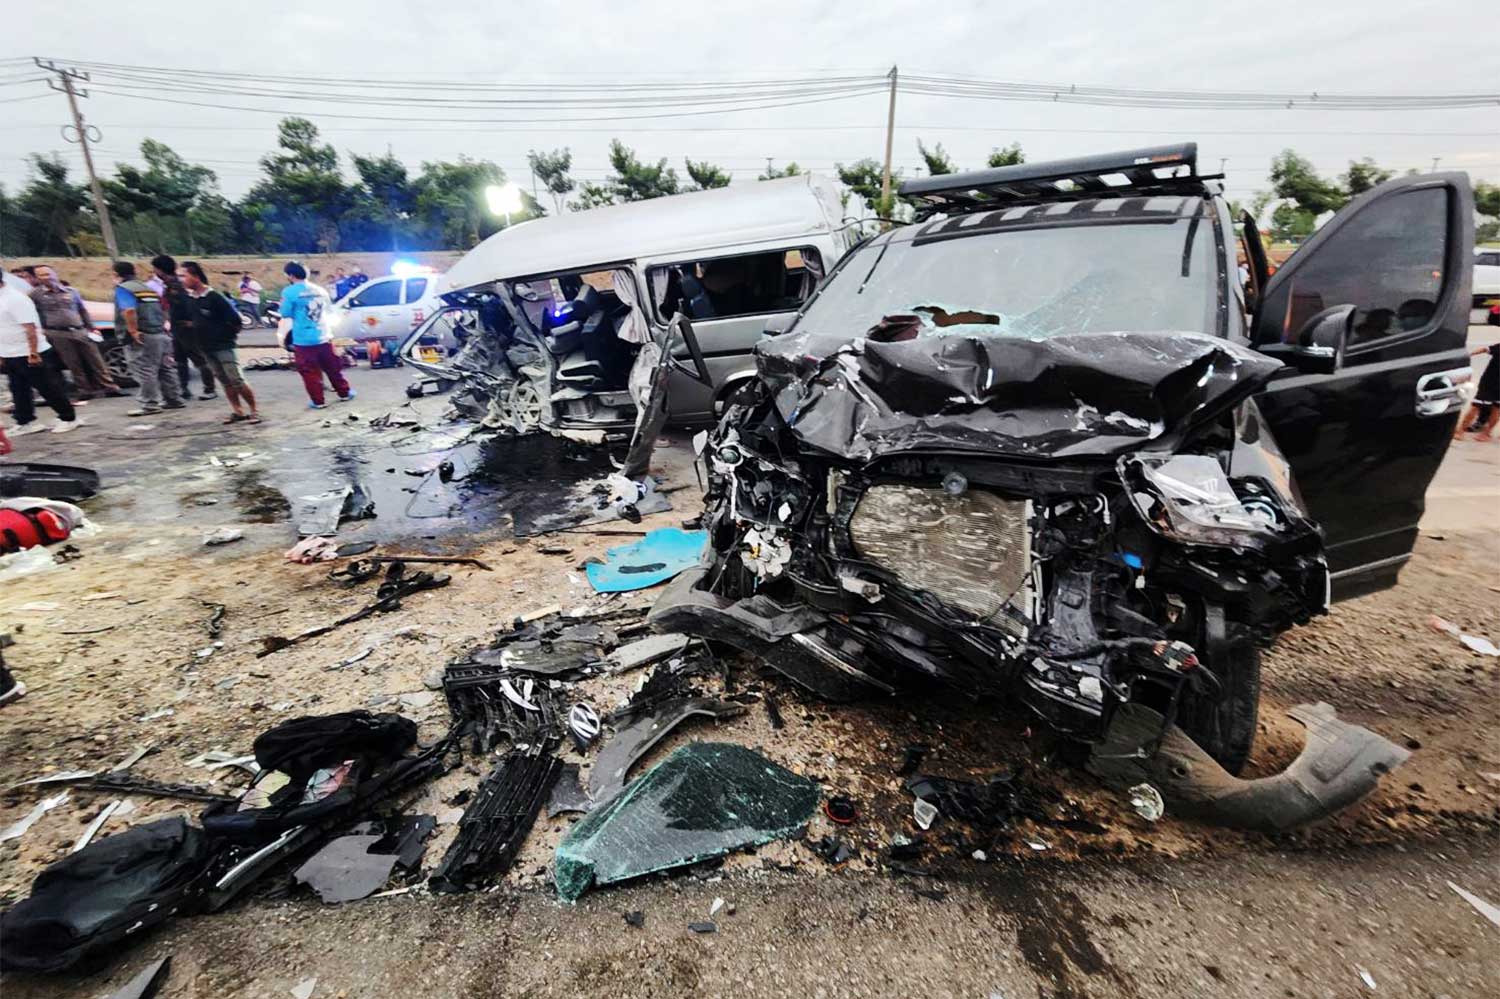 Police in northeastern Thailand report 2 students were killed